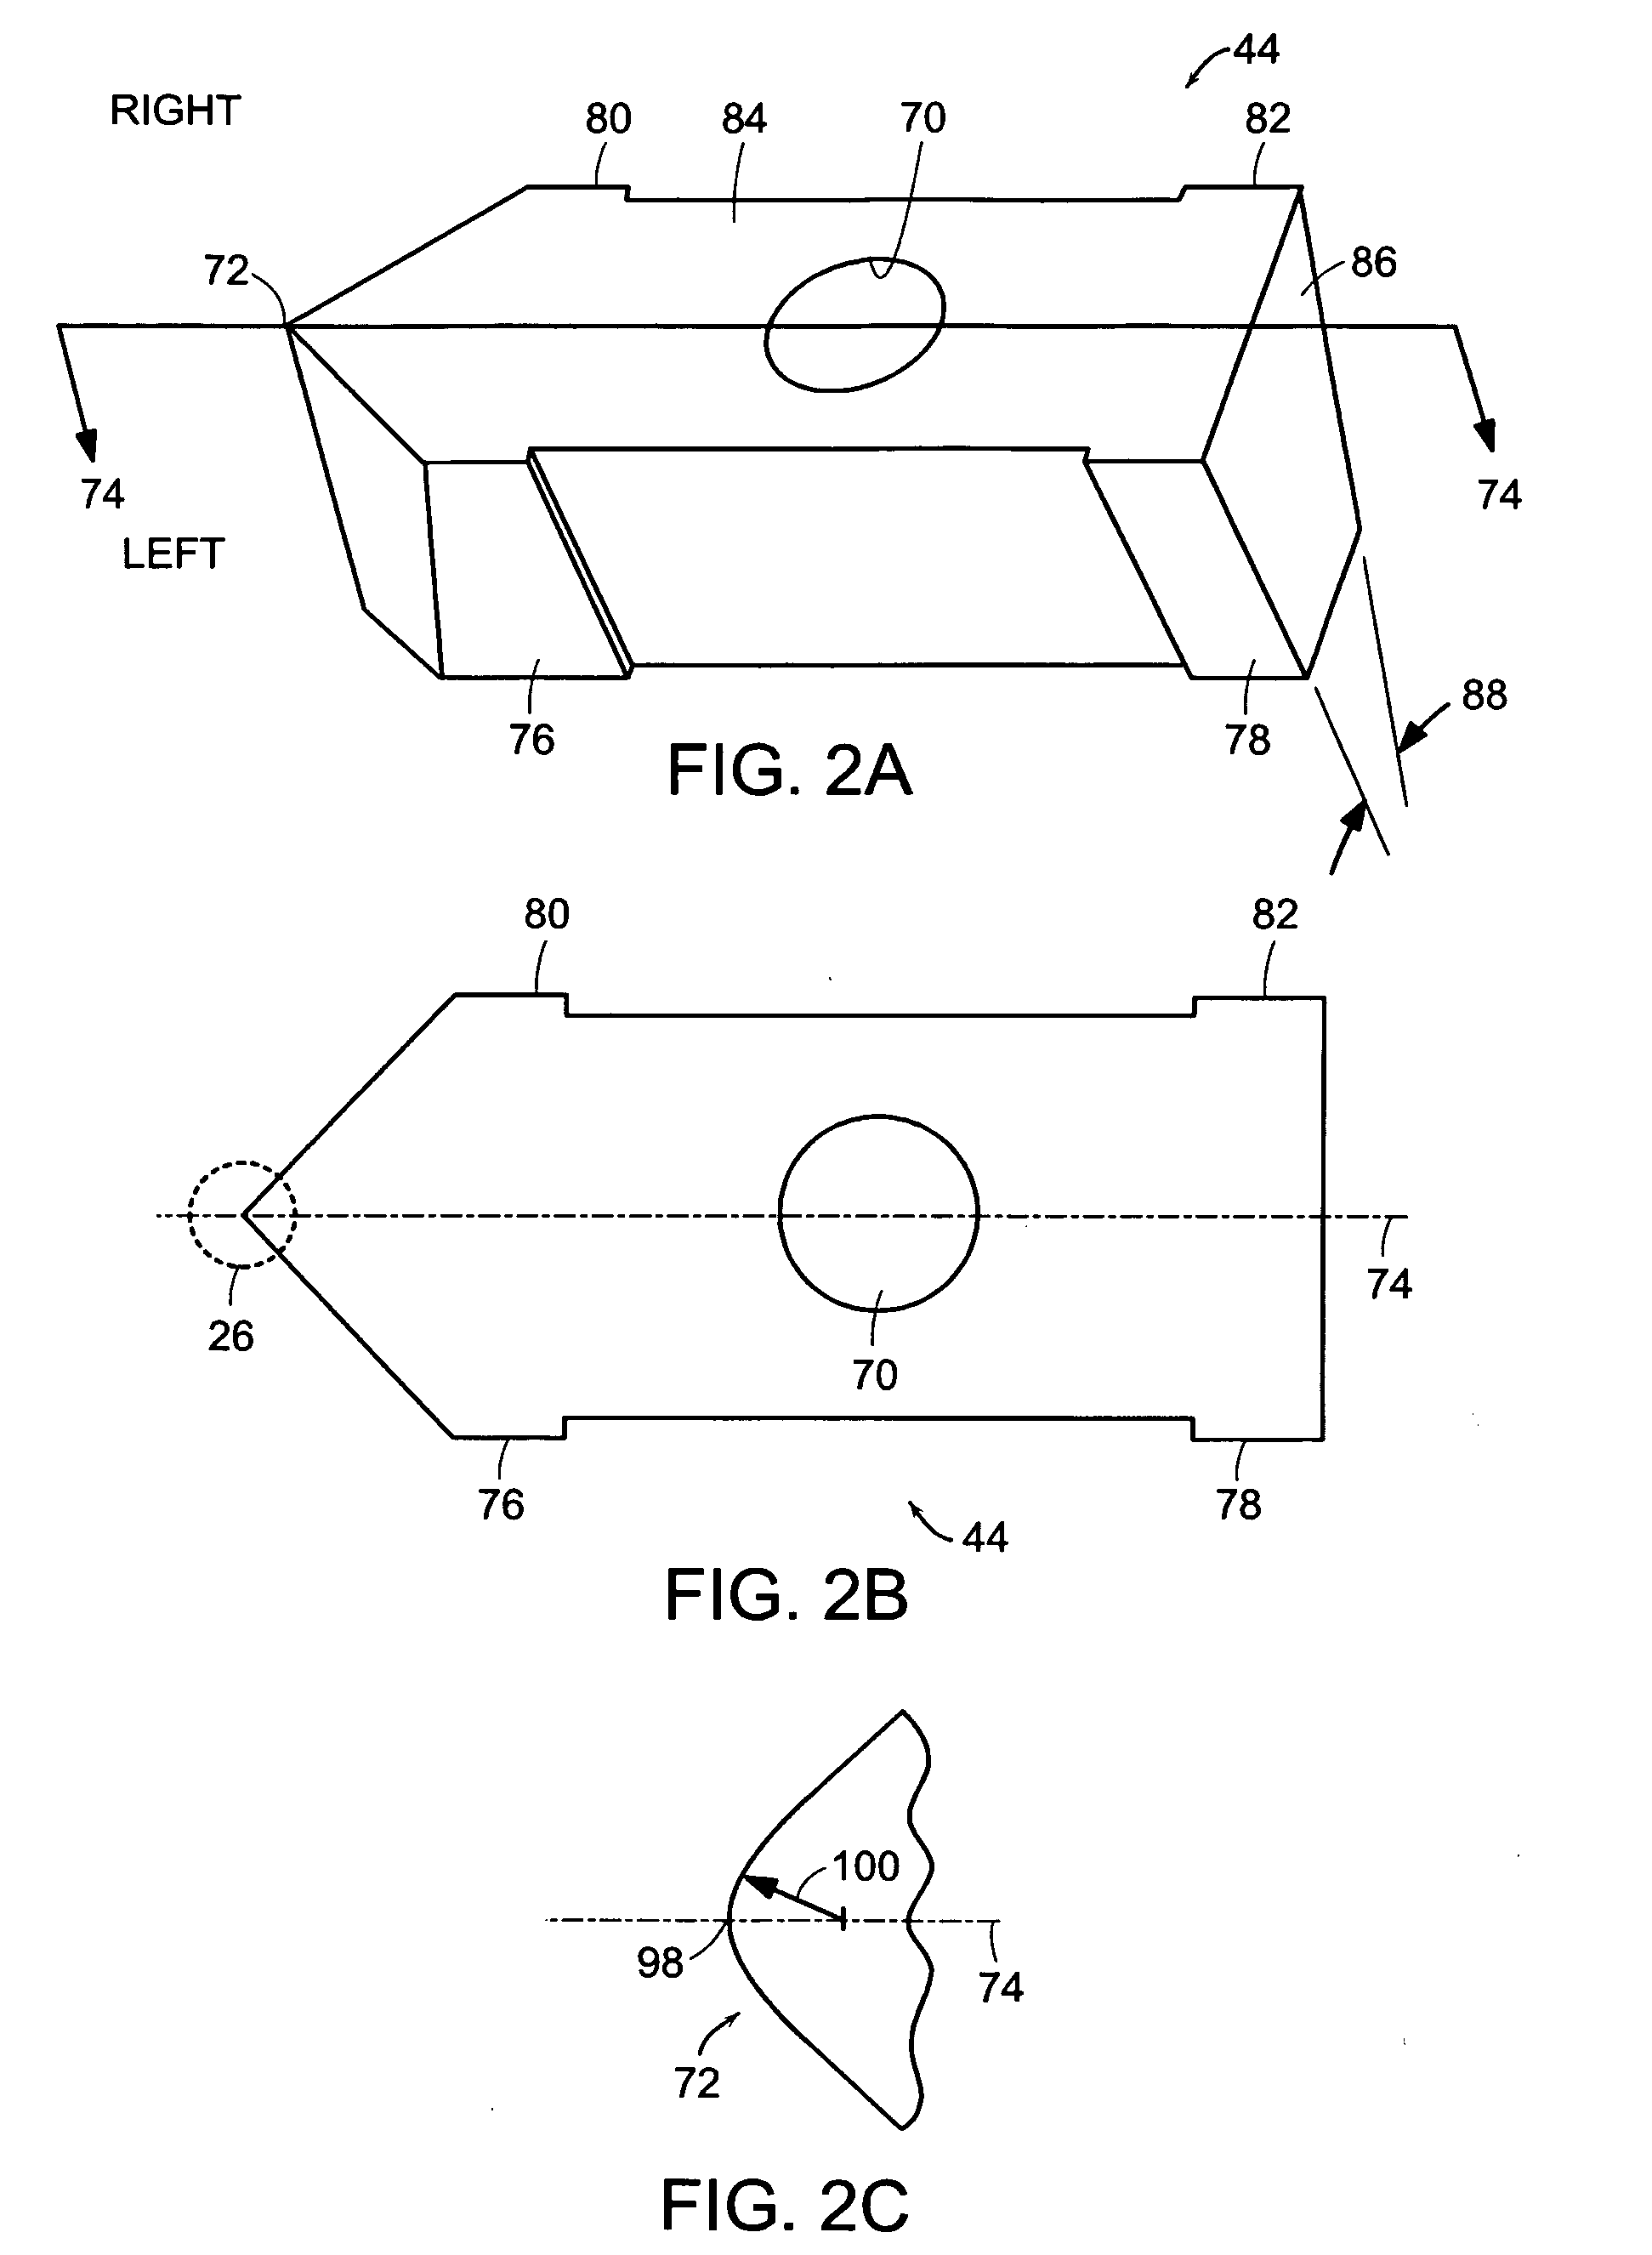 Rotary fast tool servo system and methods